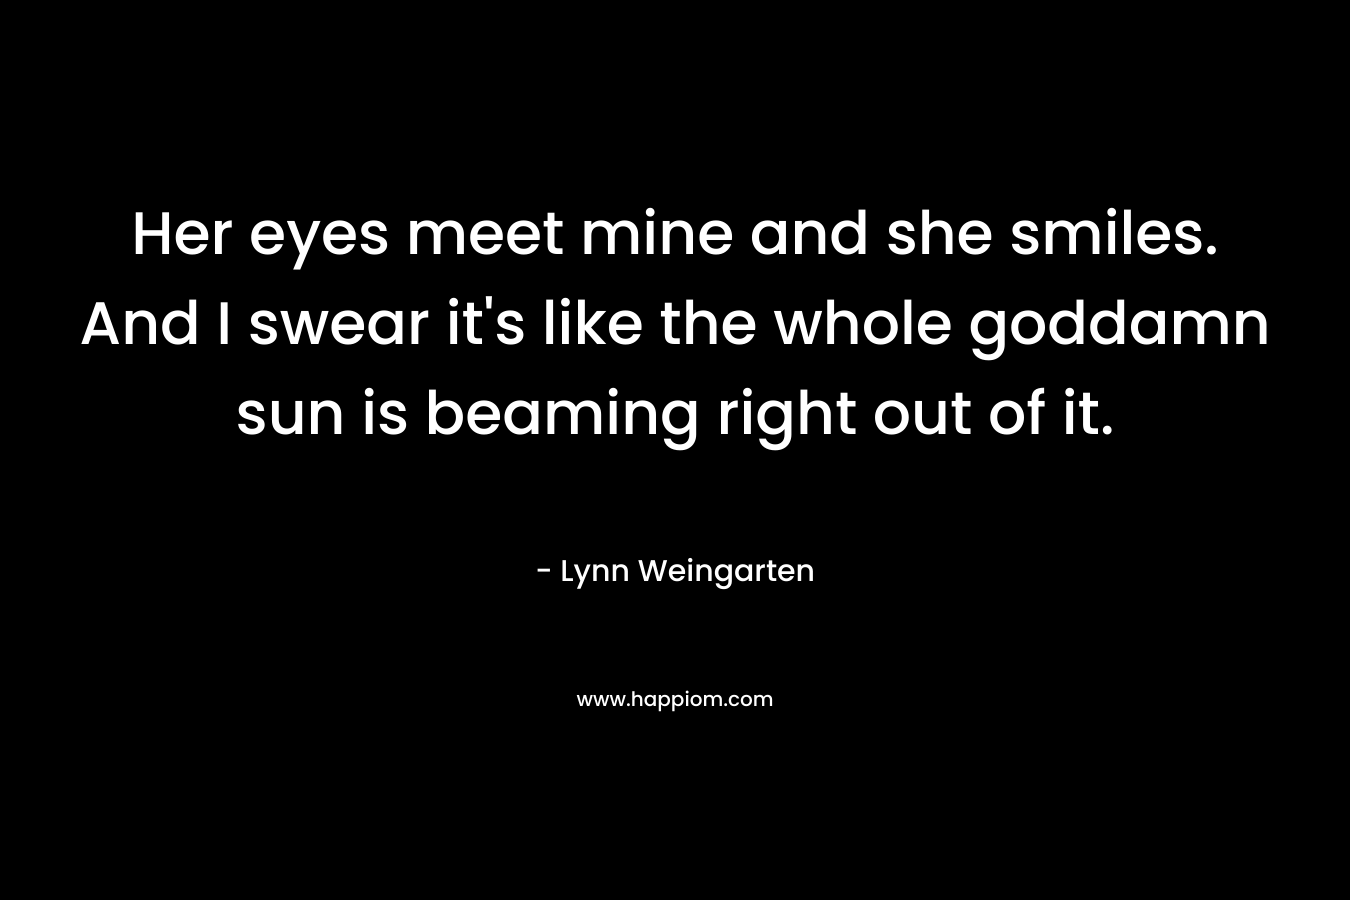 Her eyes meet mine and she smiles. And I swear it’s like the whole goddamn sun is beaming right out of it. – Lynn Weingarten